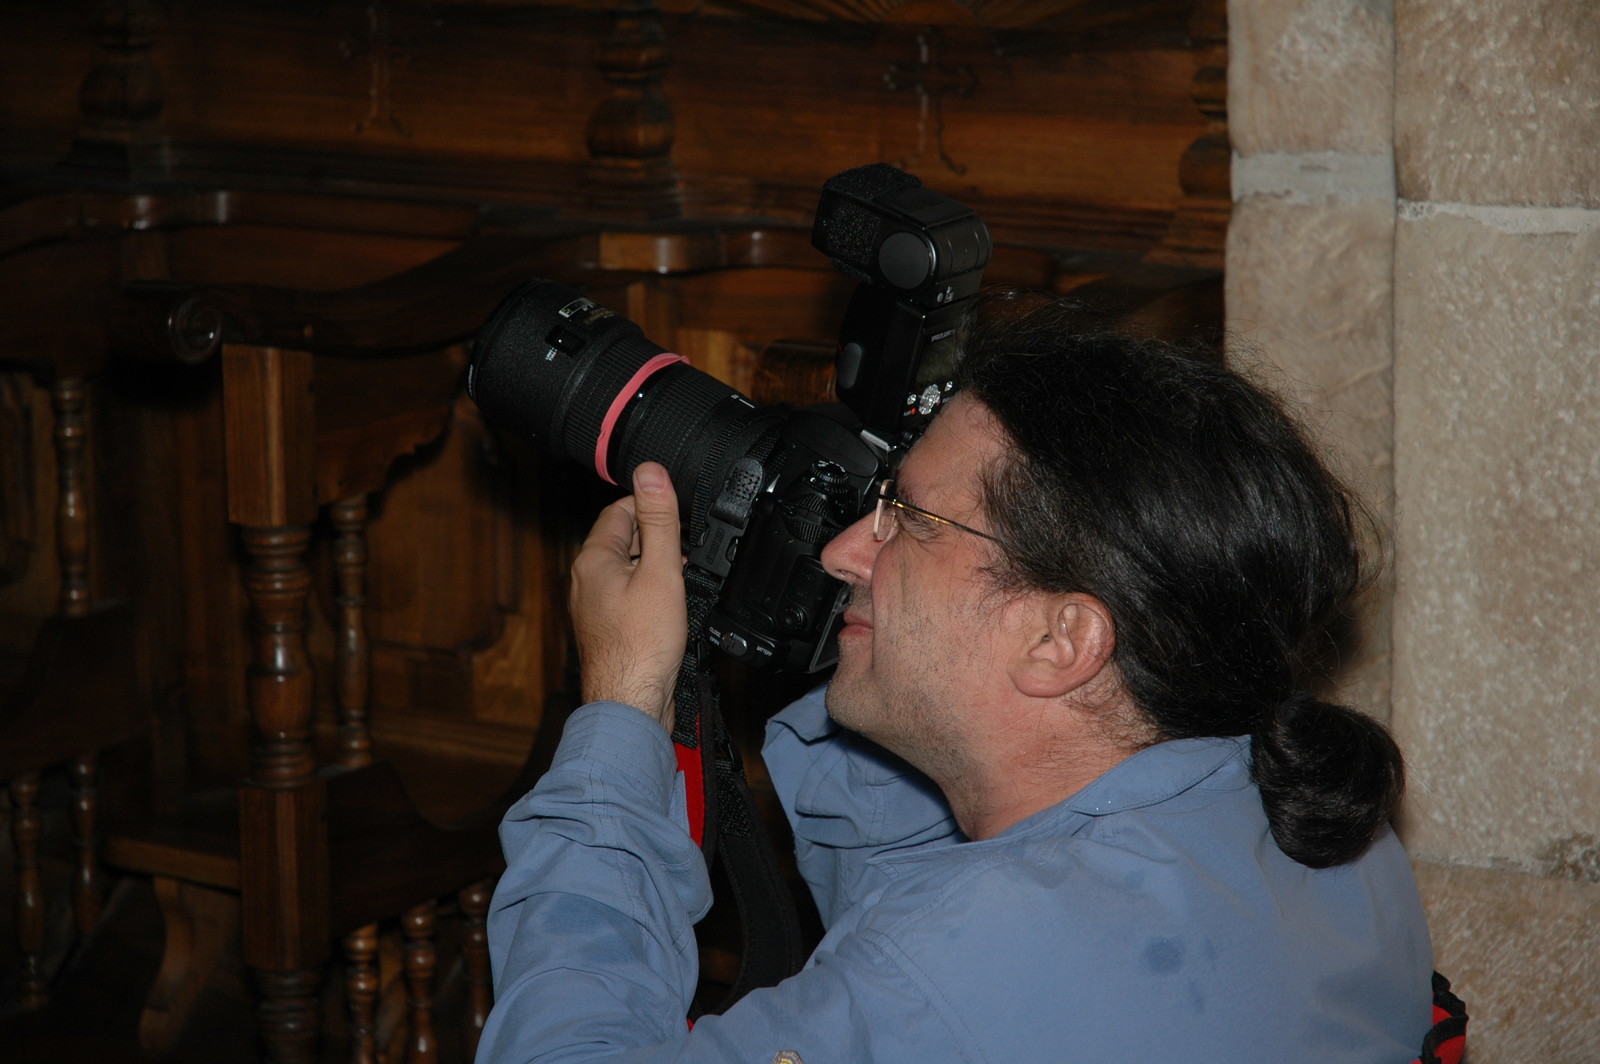 Nenad tries the flash on the camera 2